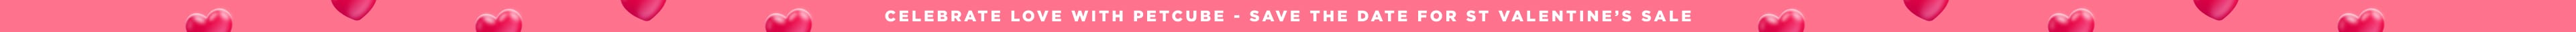 Celebrate love with Petcube - Save the Date for St Valentine’s Sale